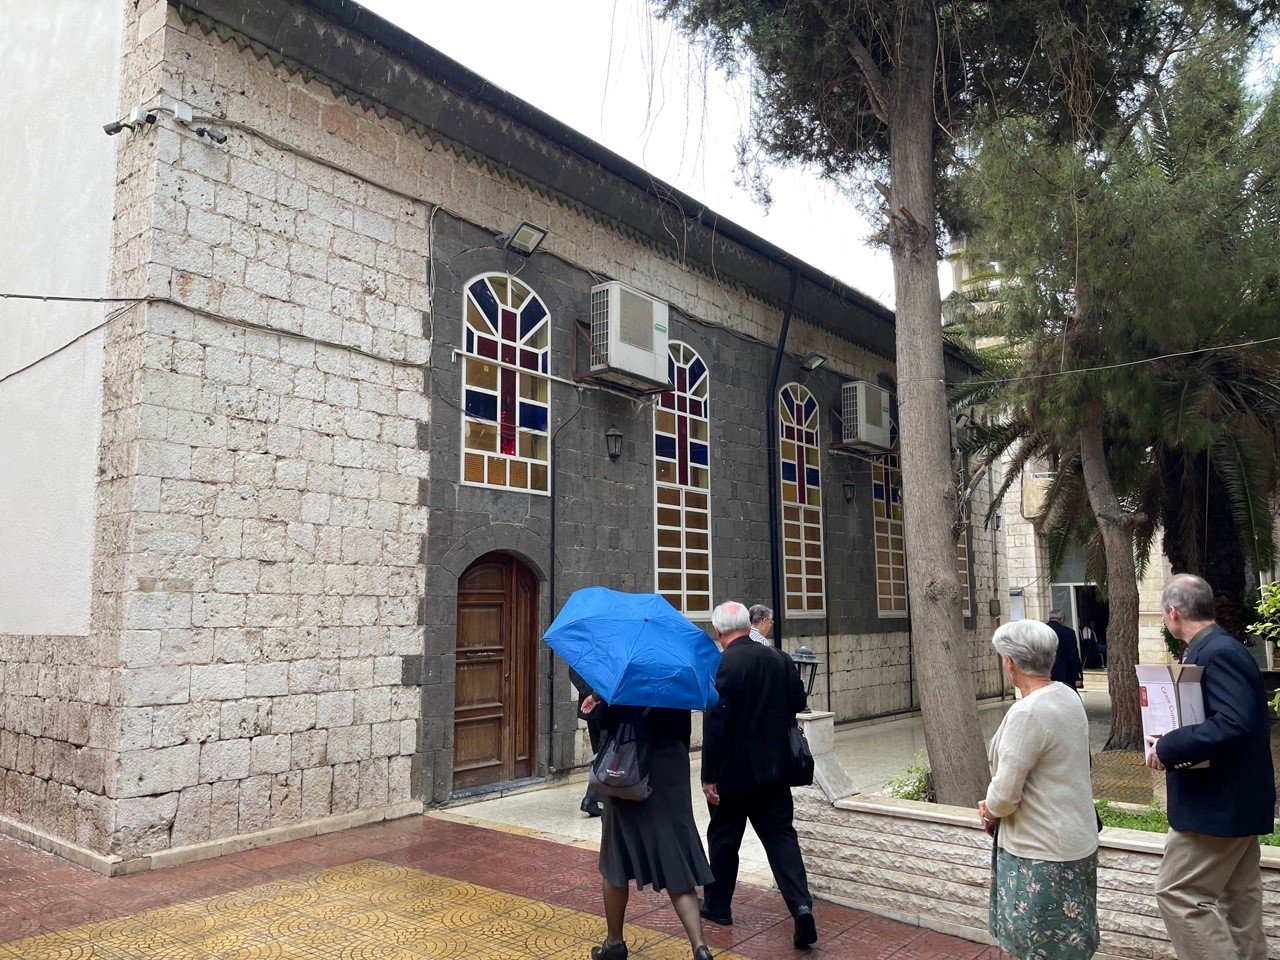  Arriving for worship at the Damascus Church on a rainy Reformation Day 